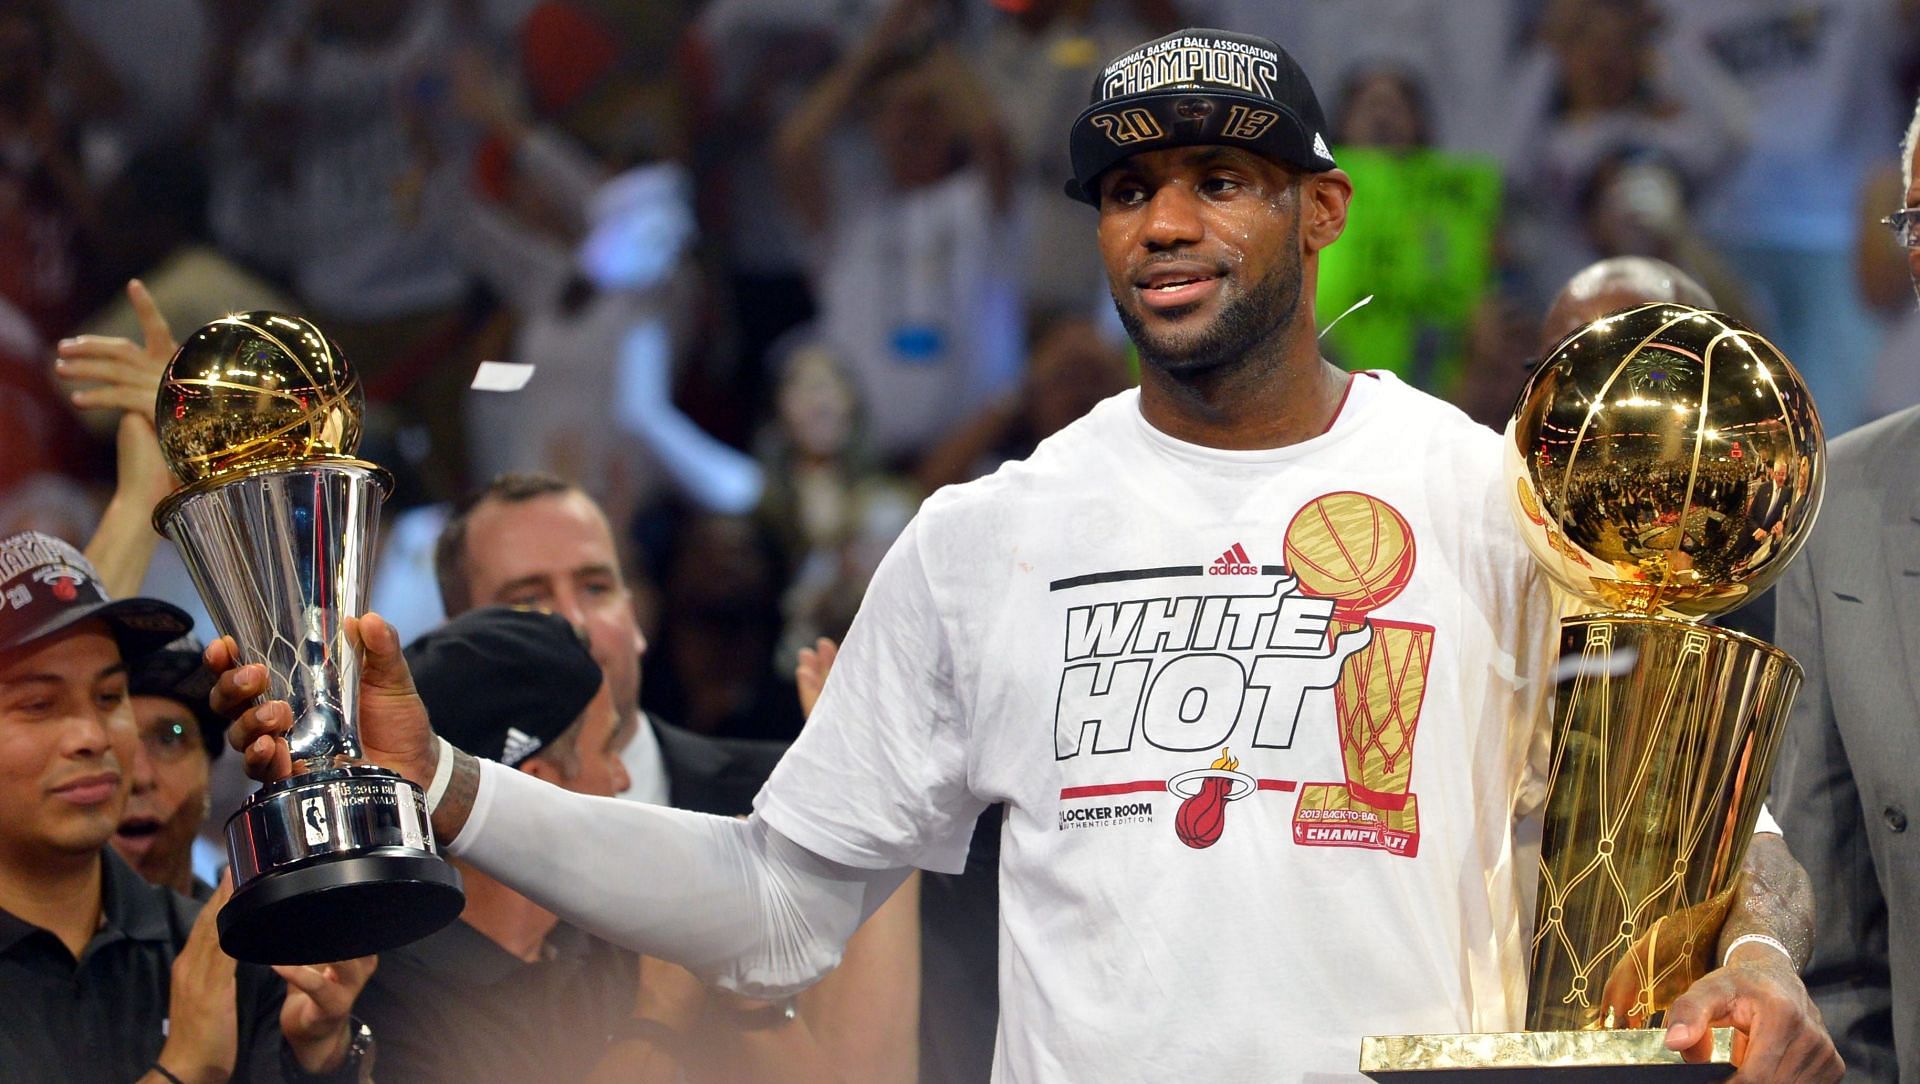 LeBron James had his most successful years in the NBA playing for the Miami Heat. [Photo: USA Today]